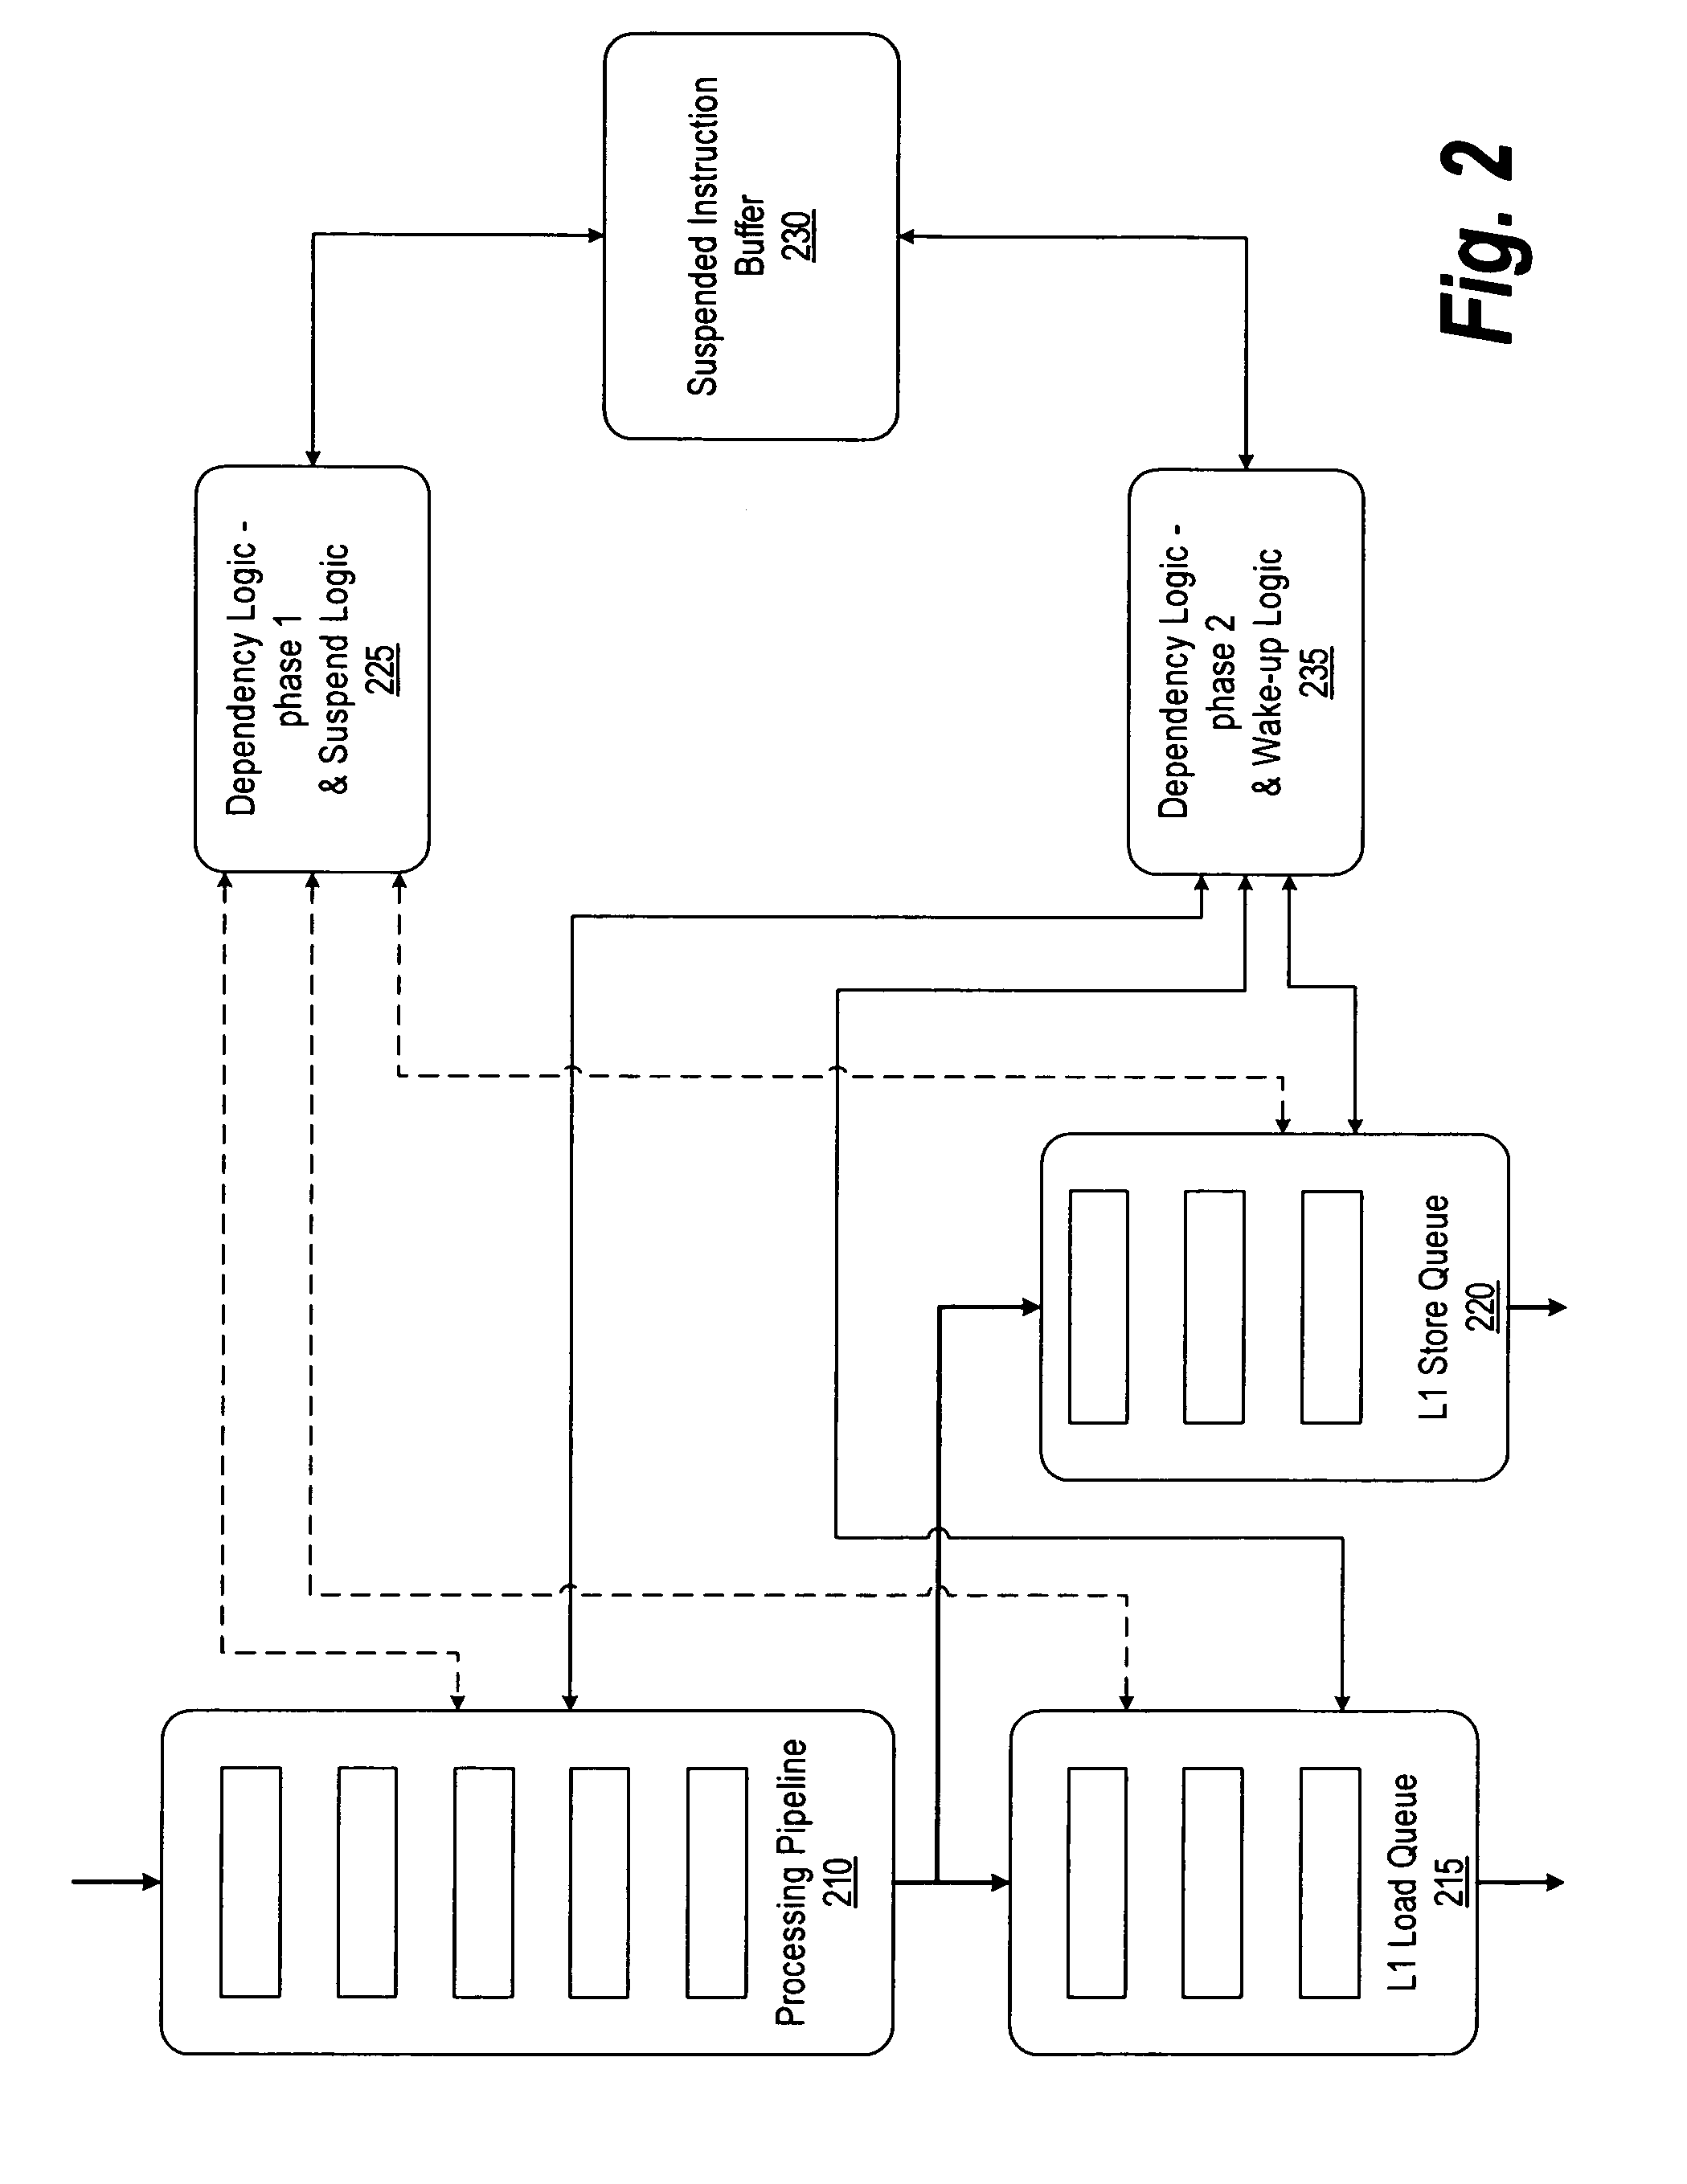 System and method for detecting instruction dependencies in multiple phases